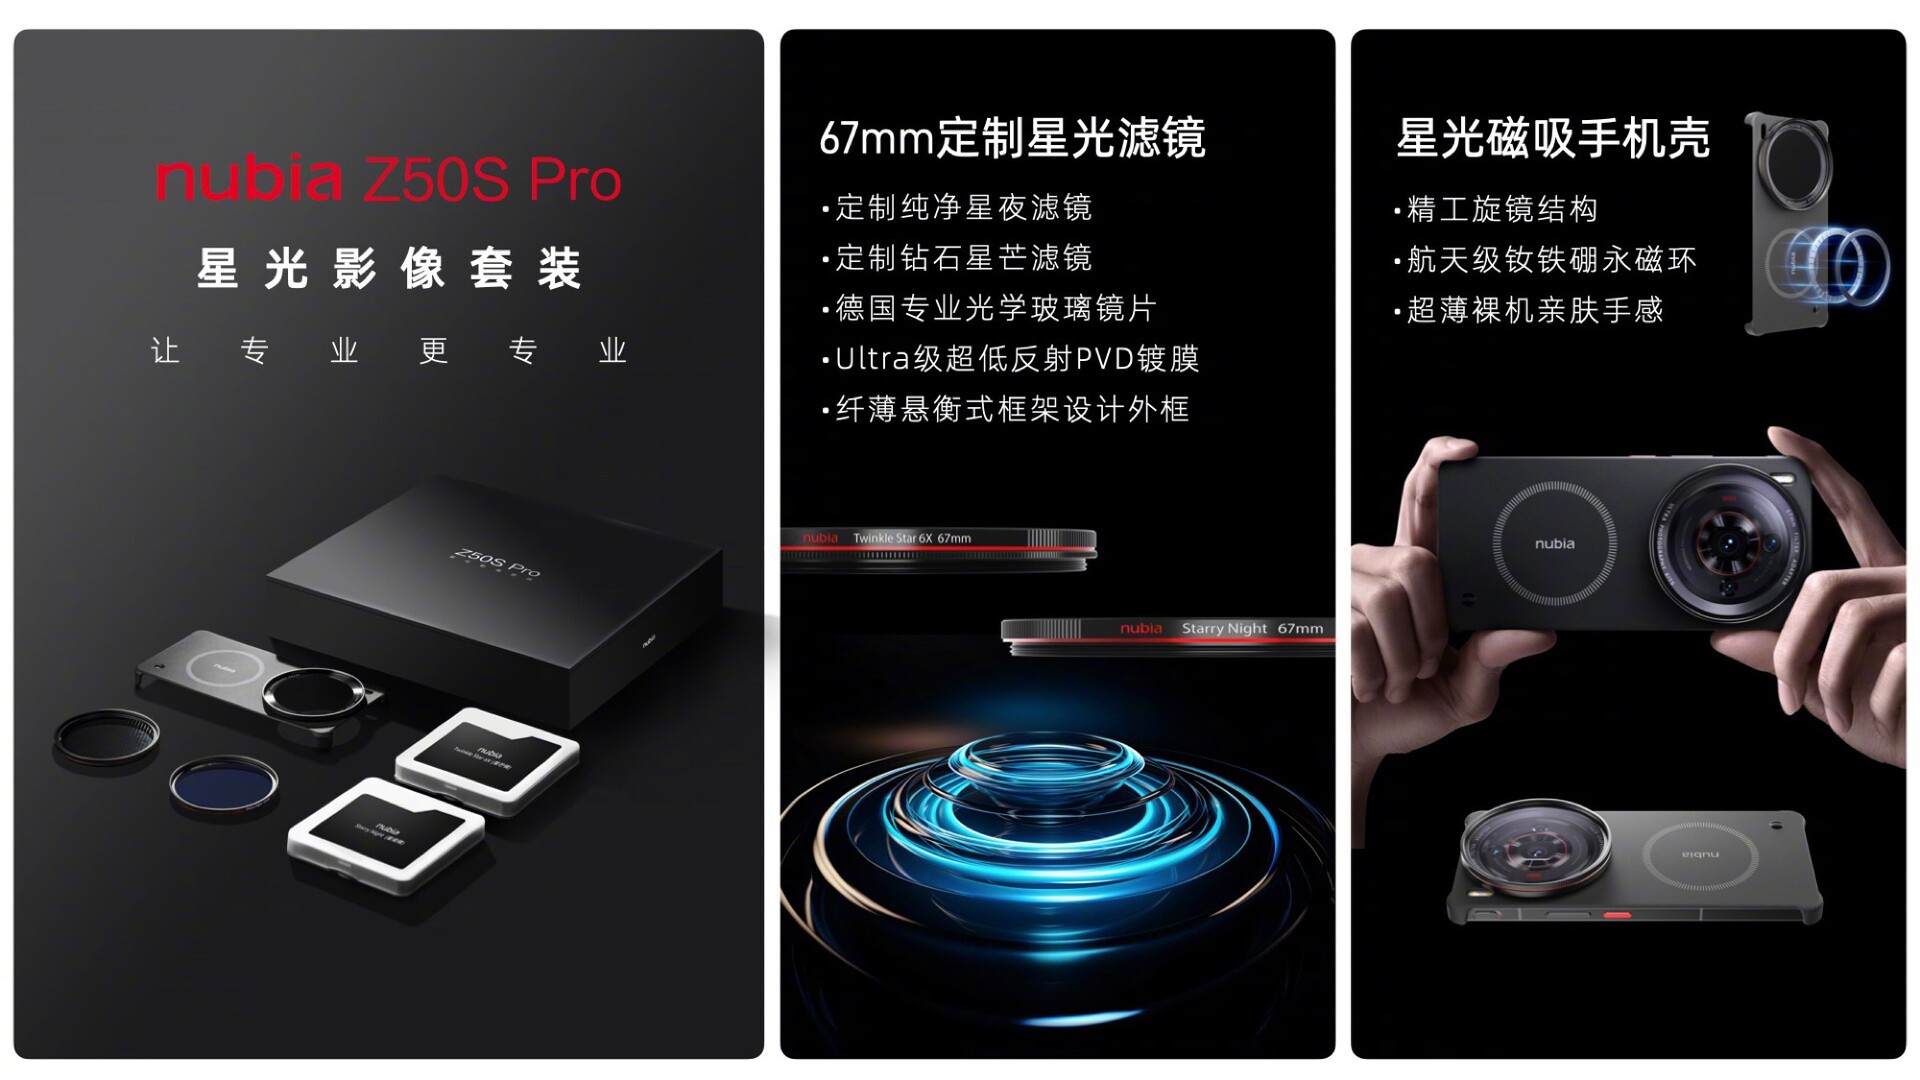 Starlight Imaging Kit for the Nubia Z50S Pro adds MagSafe and 67